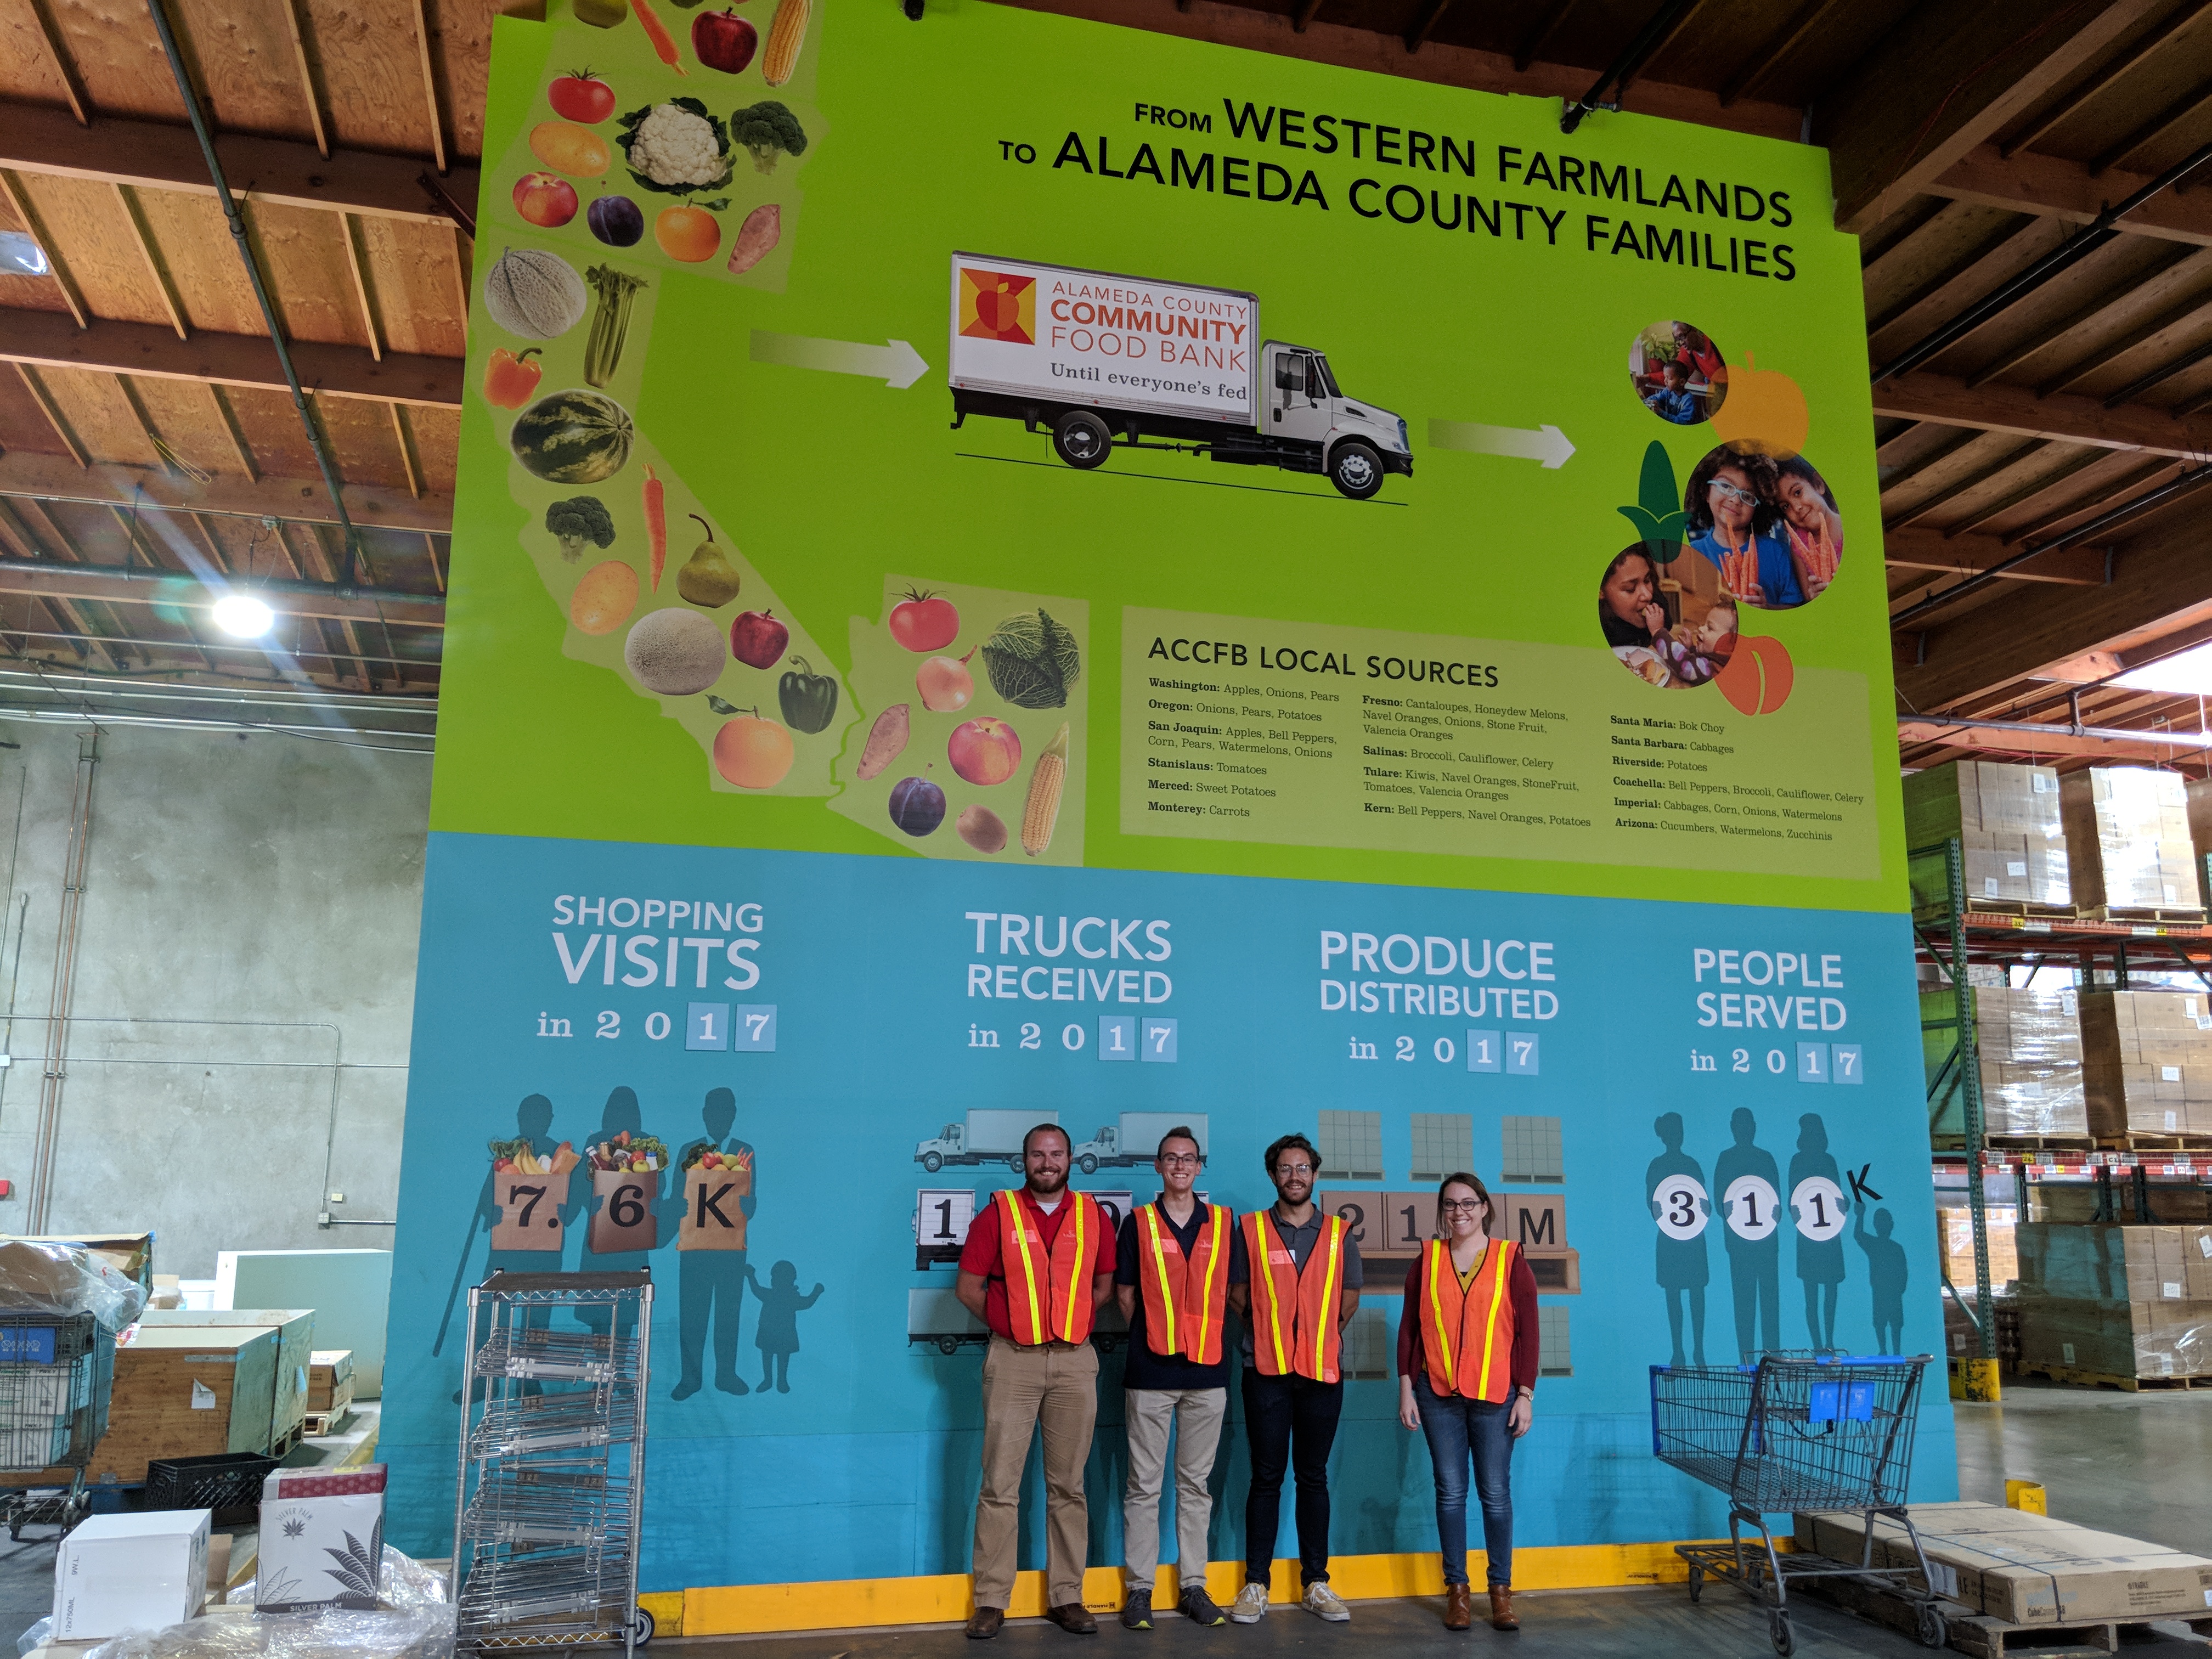 Collin (center) and his project team mates Nate (left) and Ryan (right), tour a local food distribution center with tour guide Haley (far right). The group is posing in front of an informational poster about the distribution center.